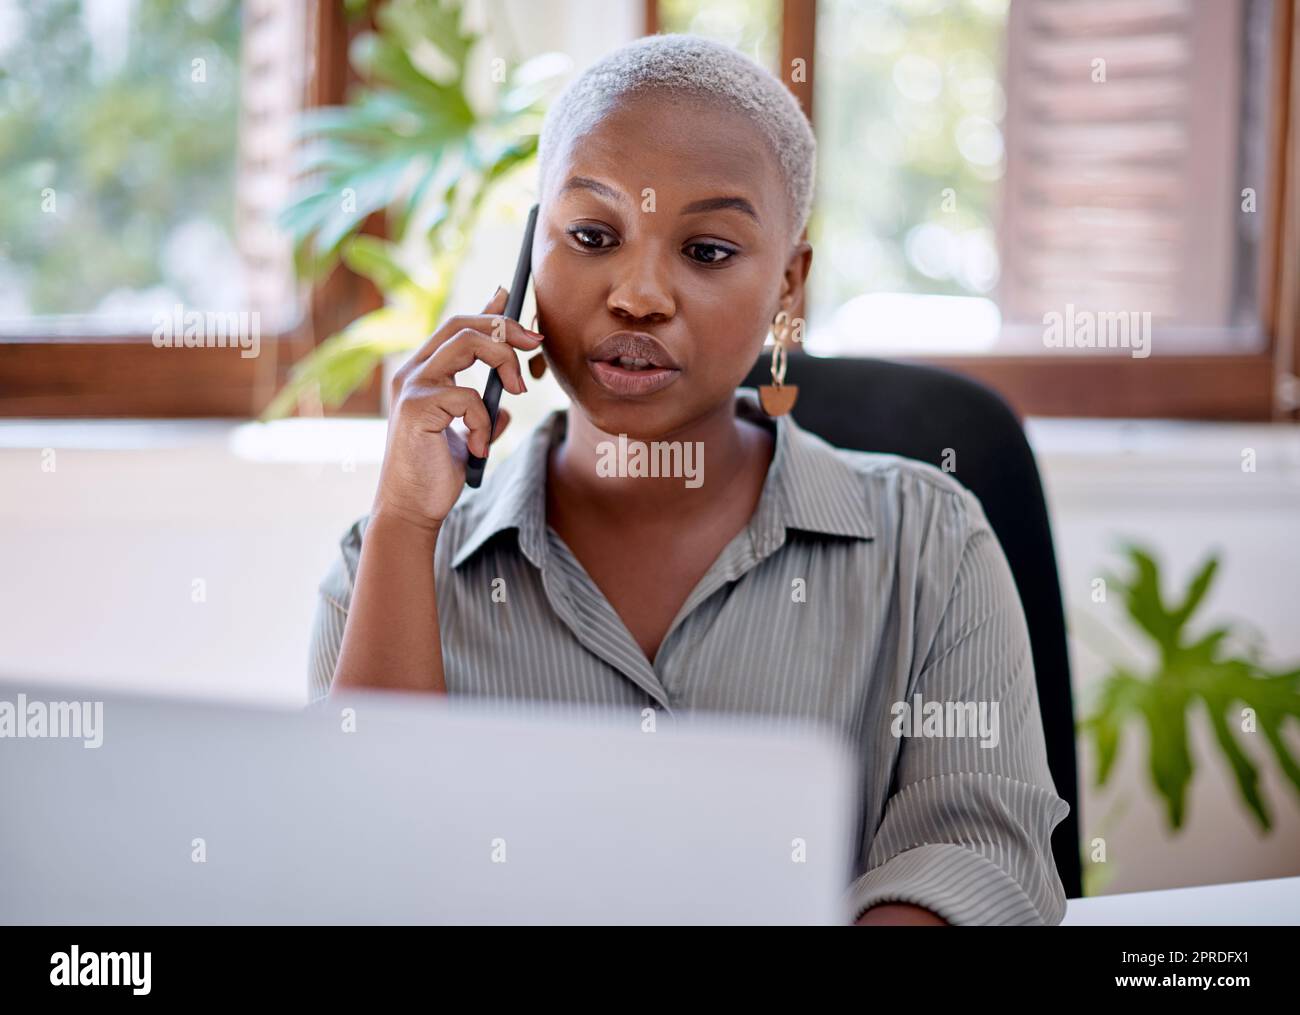 Its passion backed up with strong dedication. a young businesswoman talking on a cellphone while working on a laptop in an office. Stock Photo